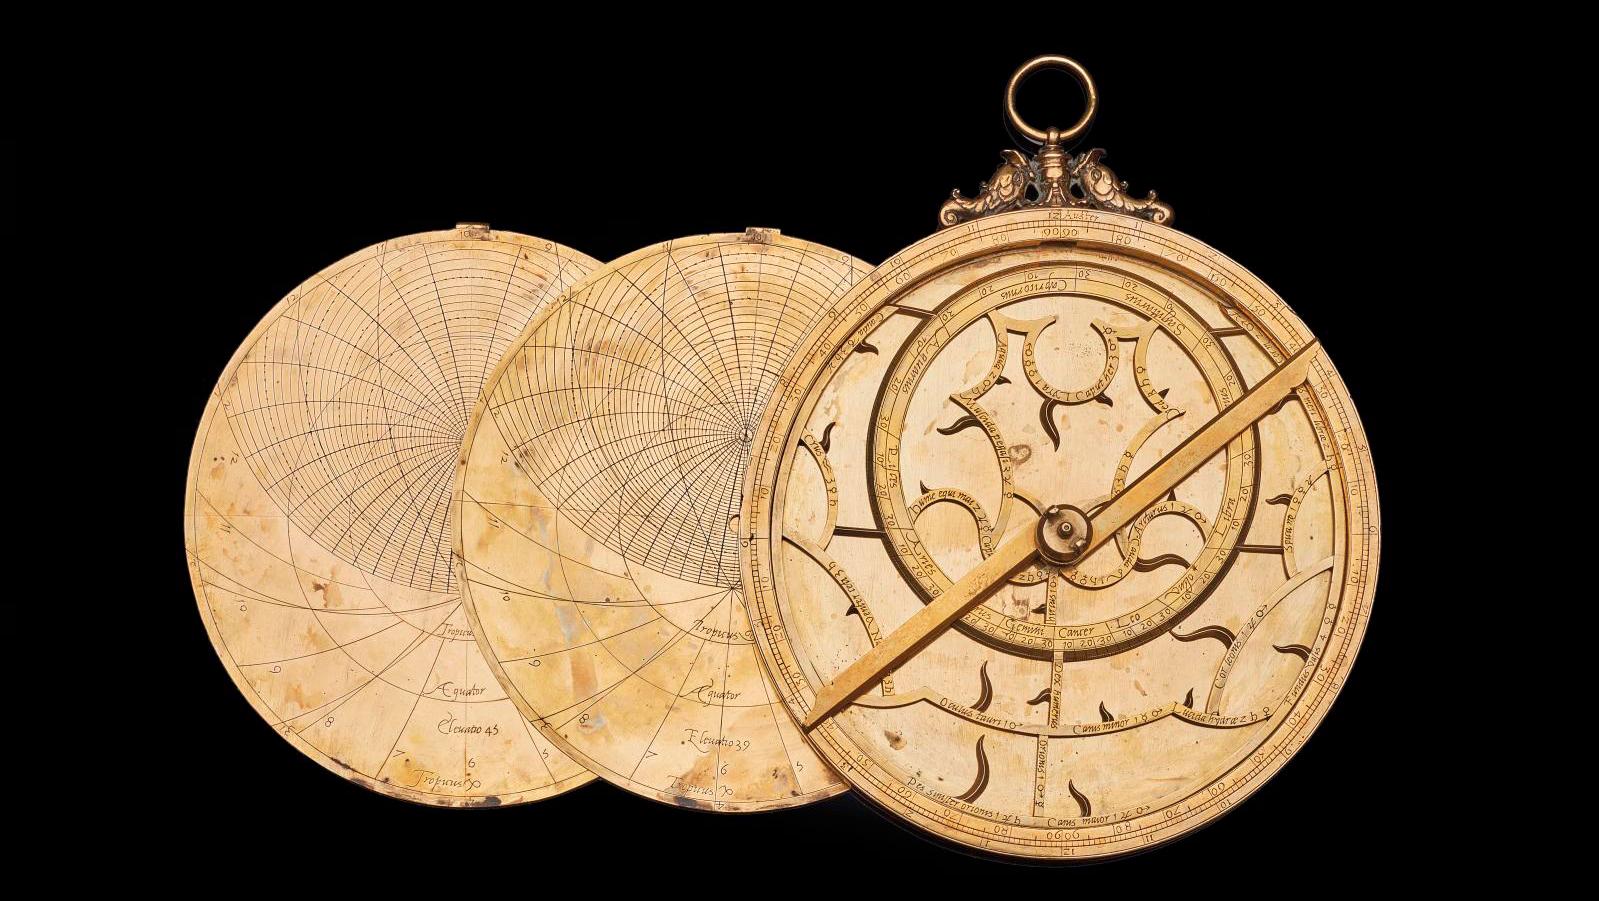 European gilt brass astrolabe attributed to Michael Piquer, dated 1543, diam. 19.1... A 16th-Century Astrolabe Positioned Under a Lucky Star 